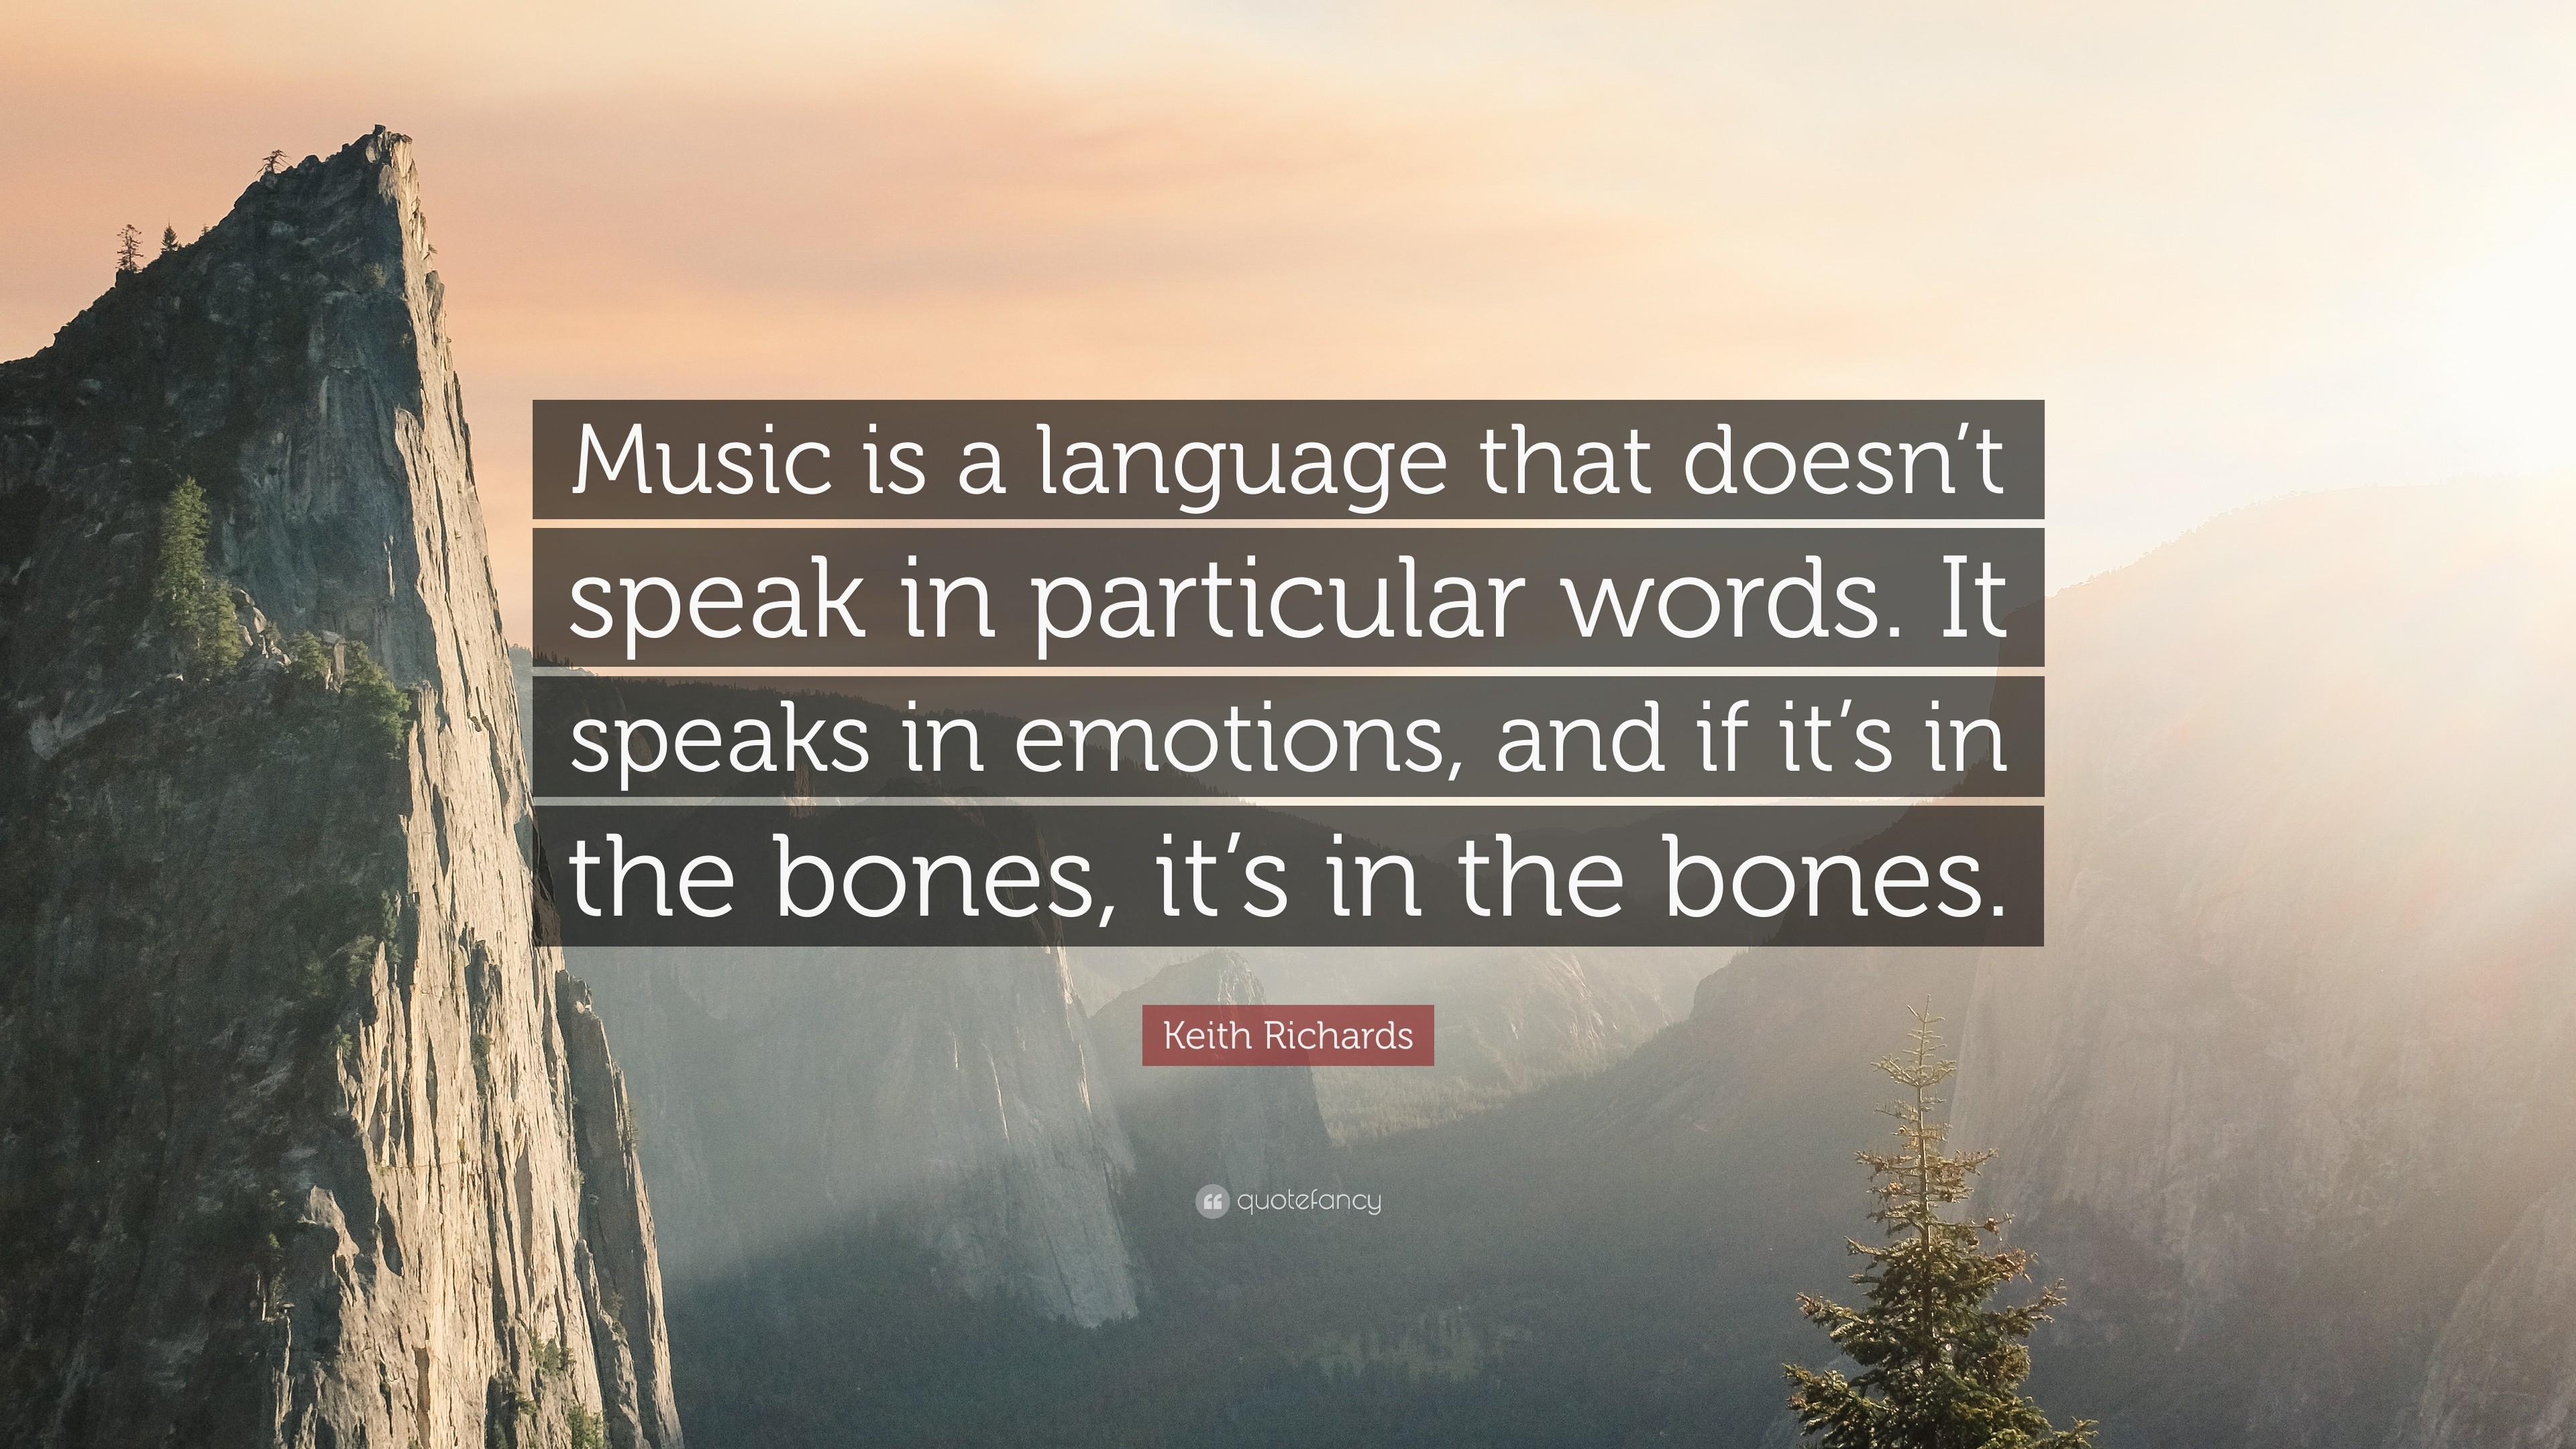 3840x2160 Keith Richards Quote: “Music is a language that doesn't speak in particular